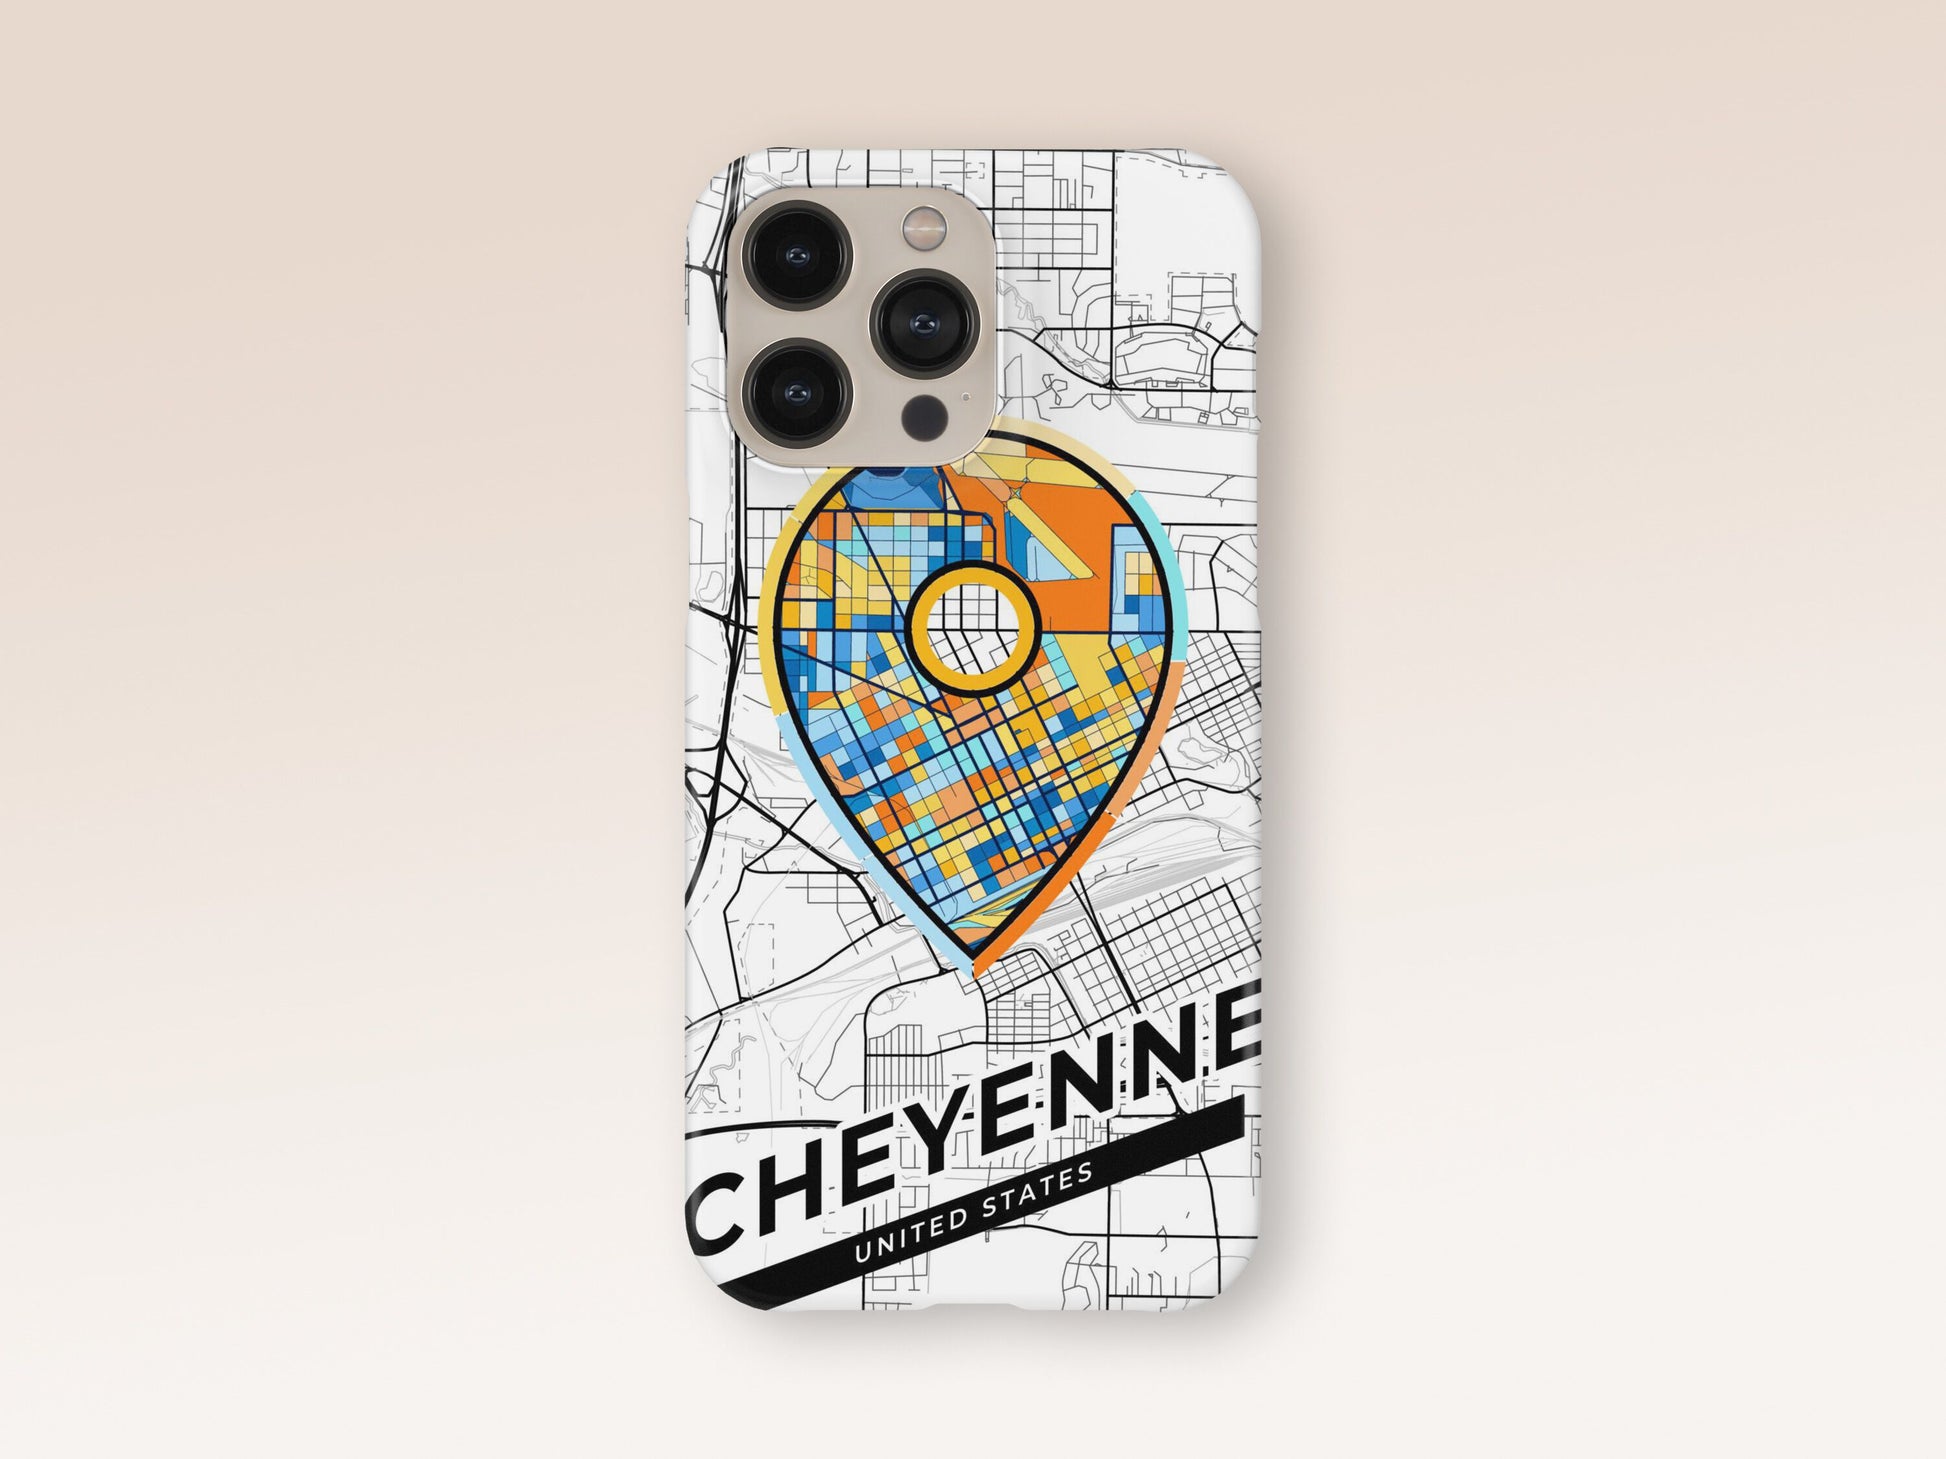 Cheyenne Wyoming slim phone case with colorful icon. Birthday, wedding or housewarming gift. Couple match cases. 1